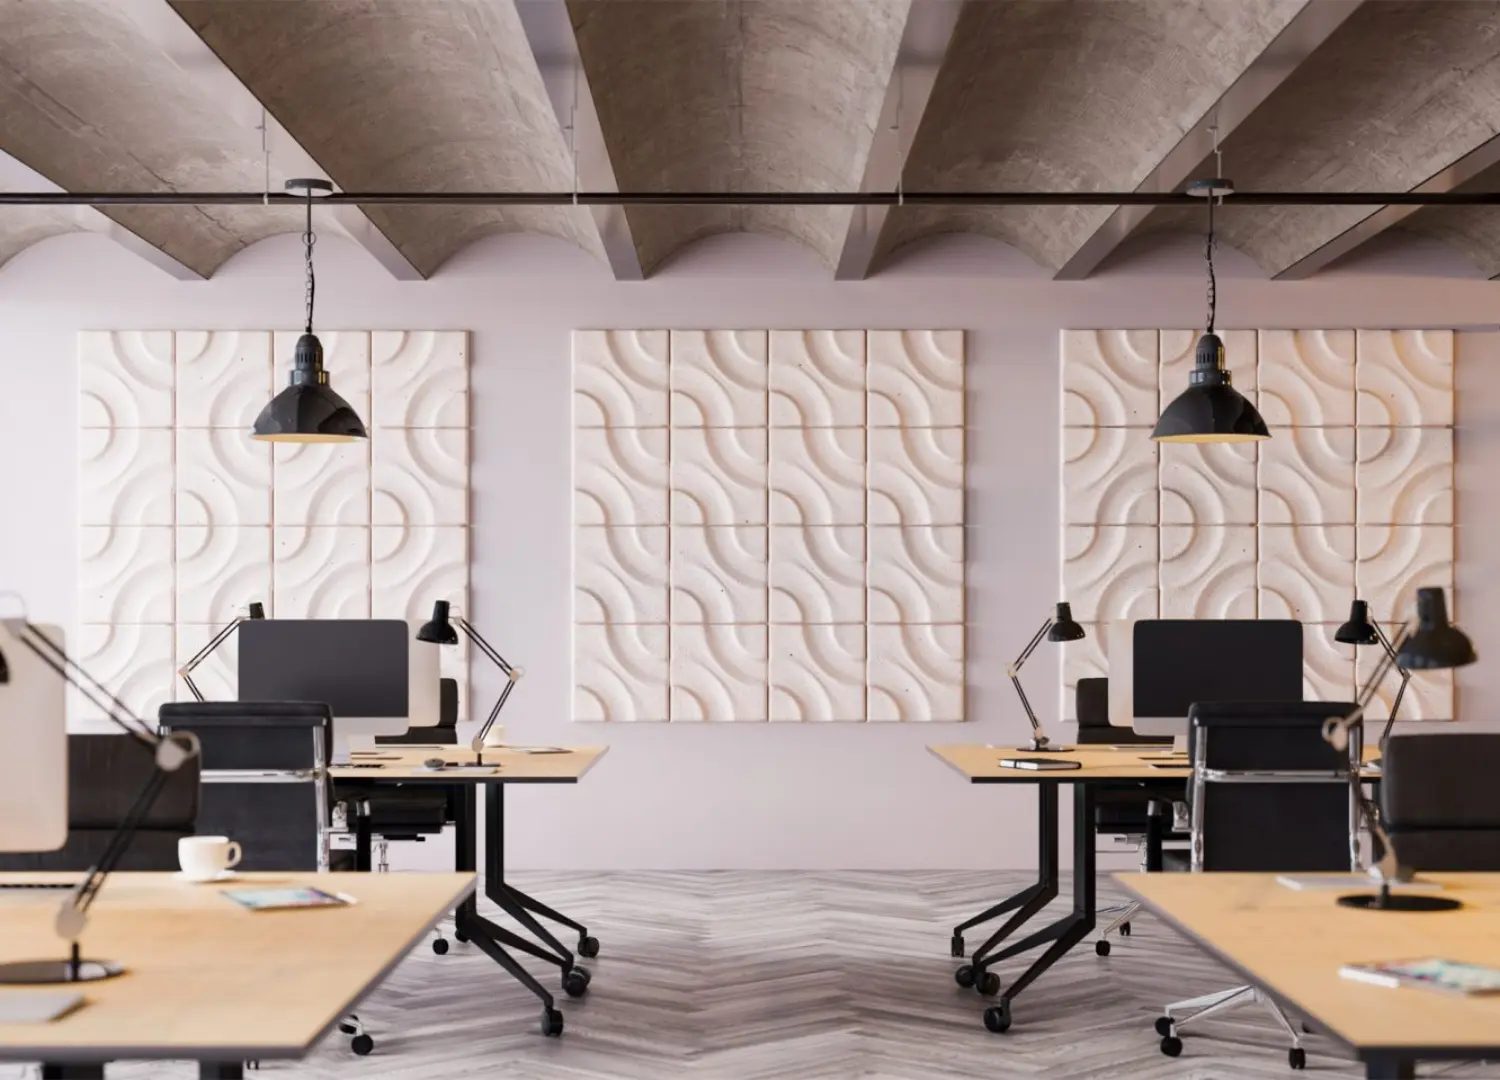 Fika by AllSfär / Acoustic products – 5 sustainable designs ideal for your workspace